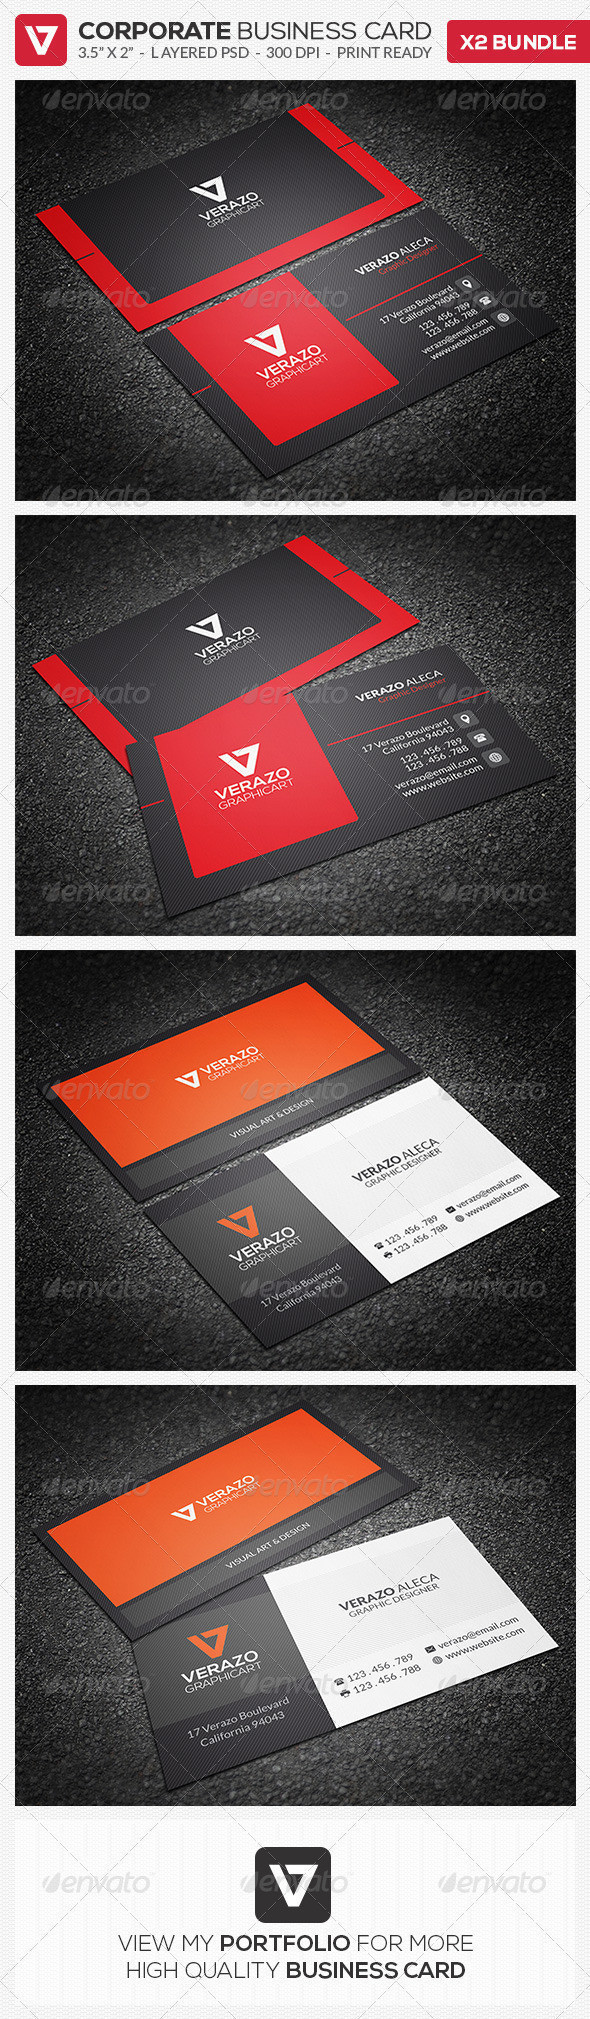 03 creative modern corporate business card bundle preview